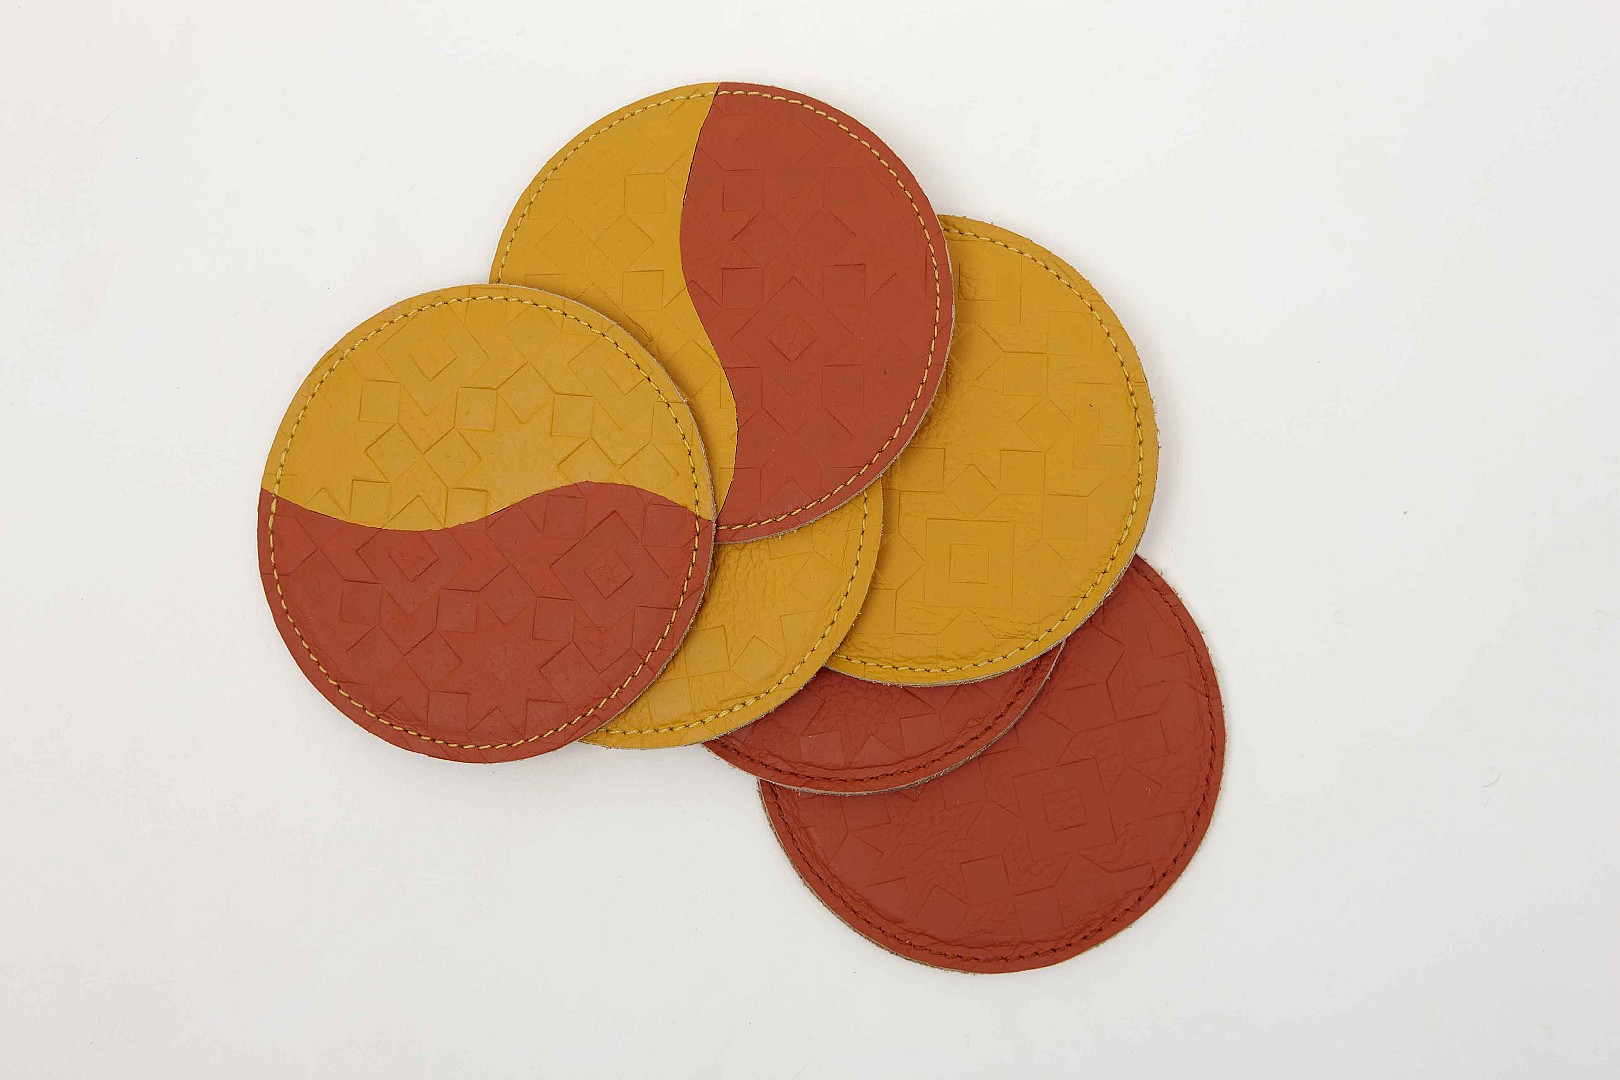 Nada Debs&rsquo; Horizon Collection is an experiment in leather marquetry